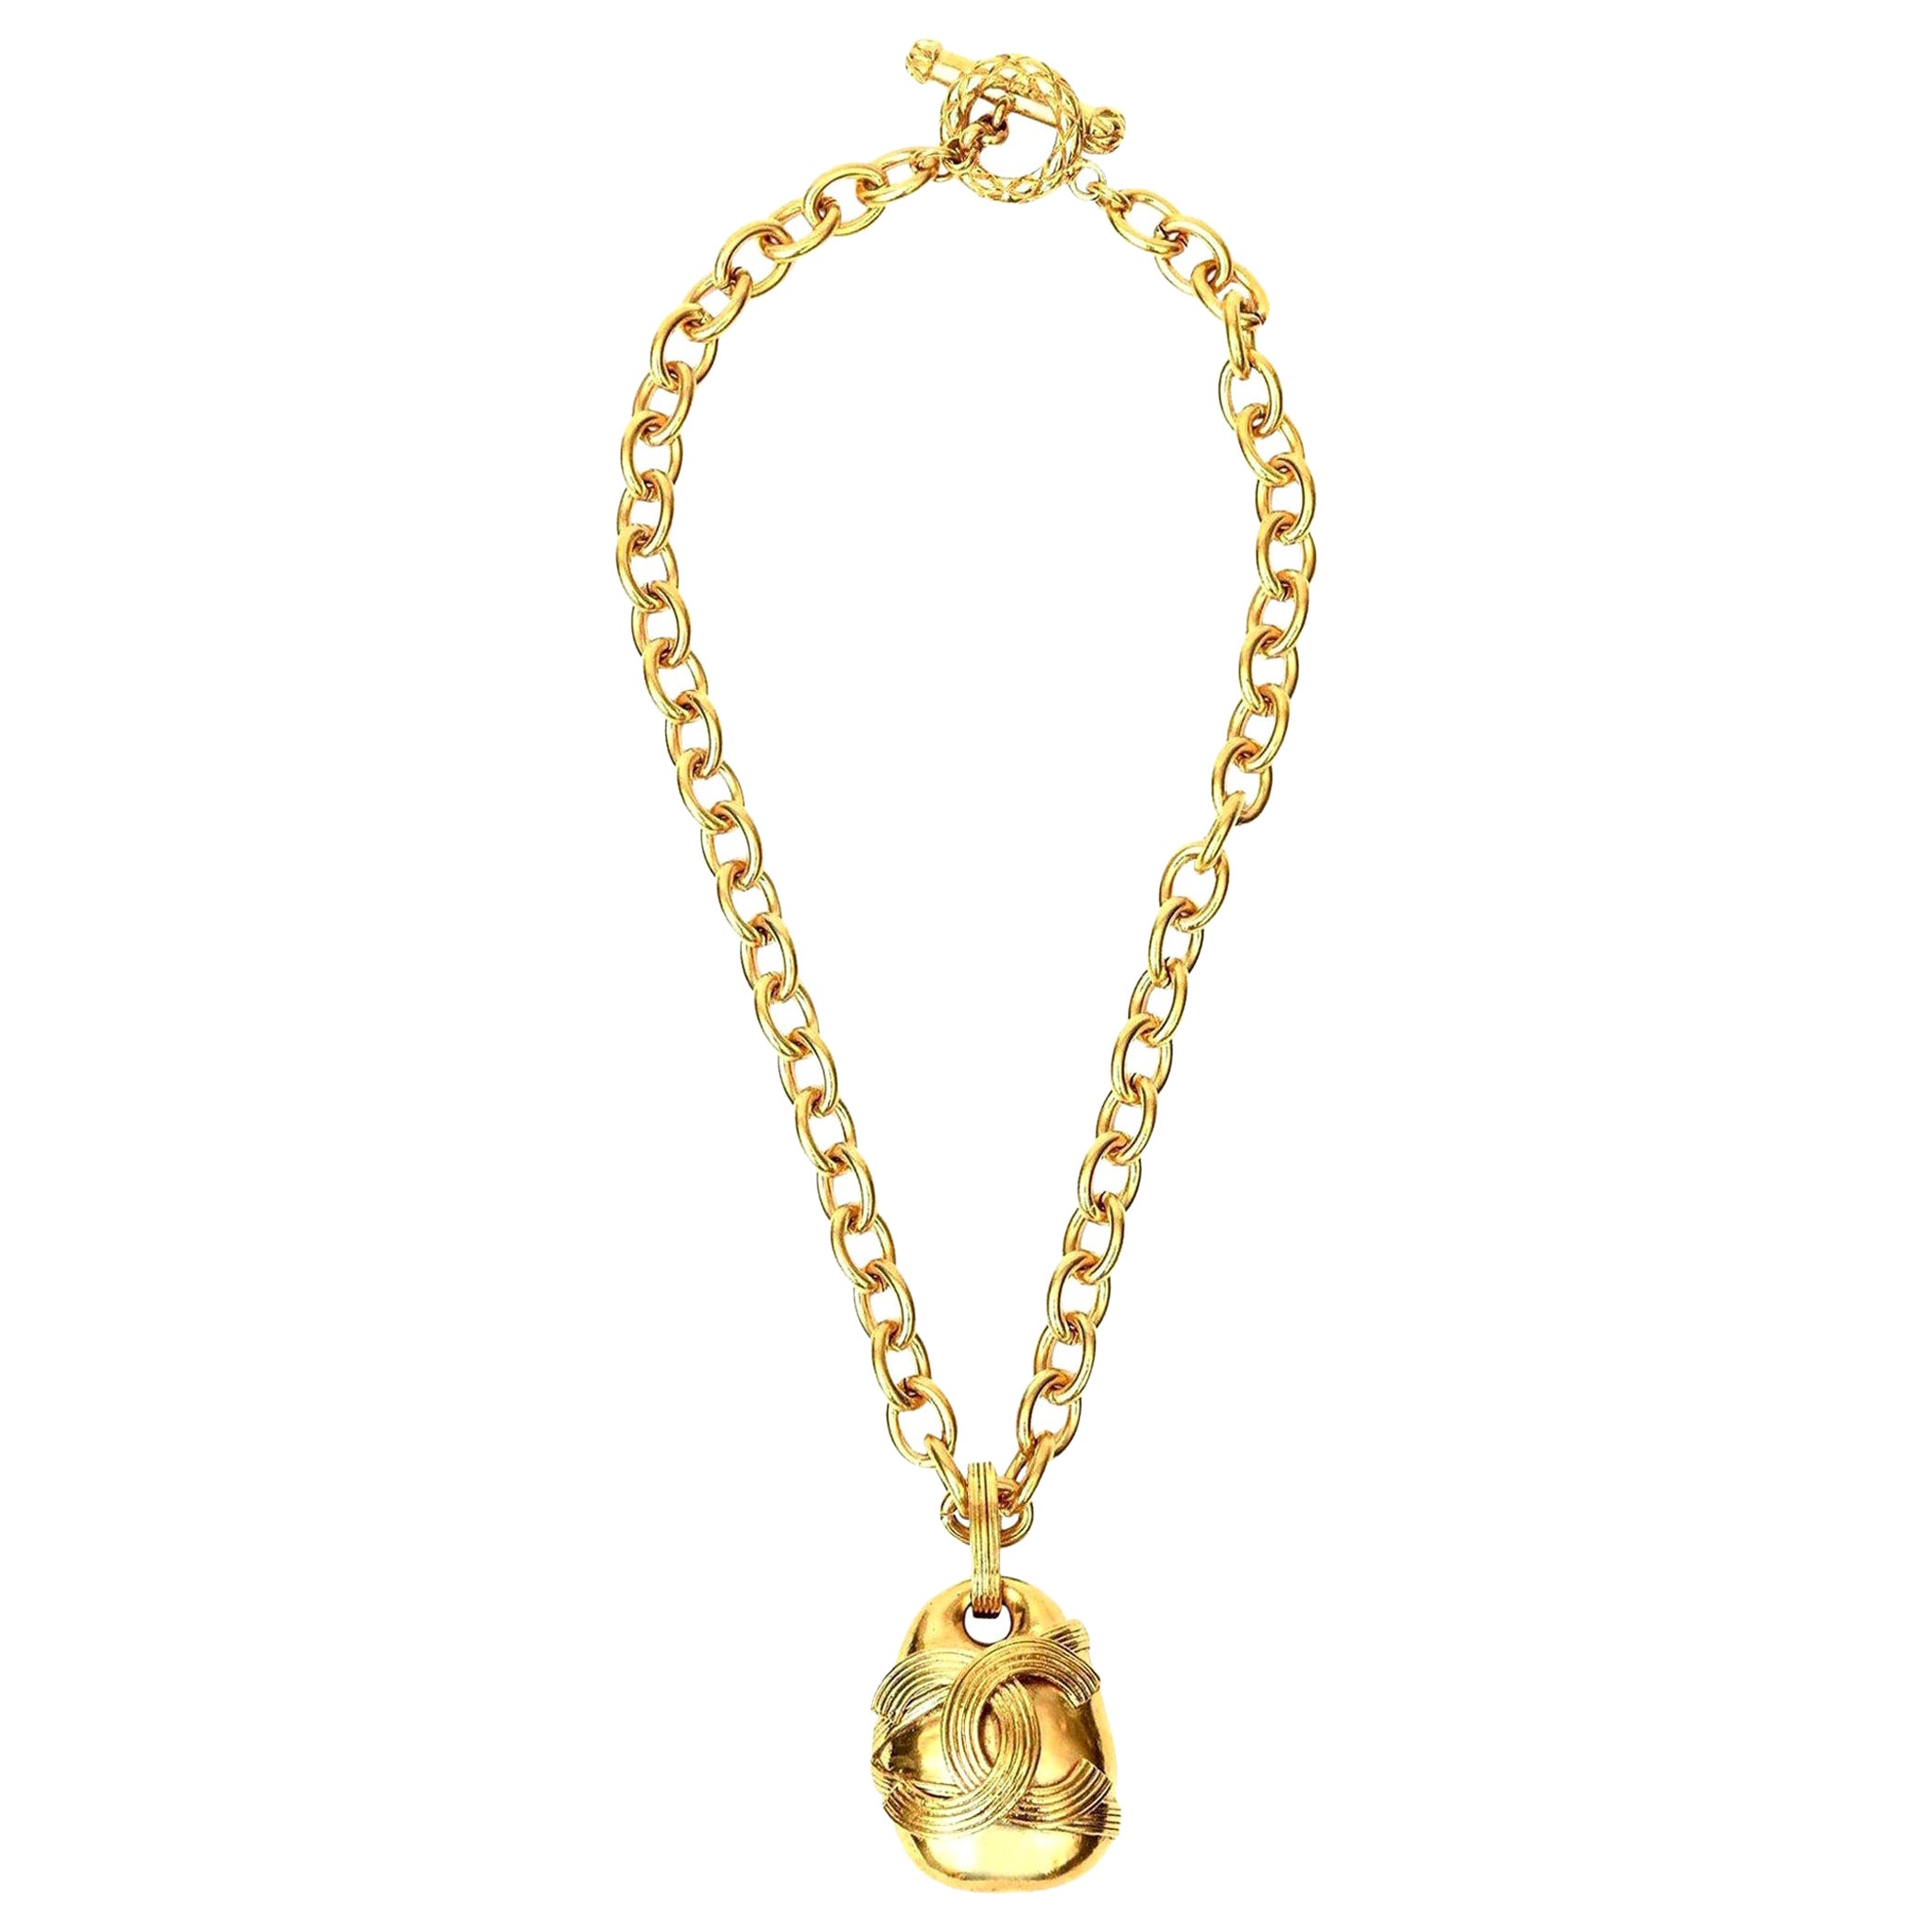 Chanel Large Quilted Bag Charm Pendant Necklace on Triple Link Chain